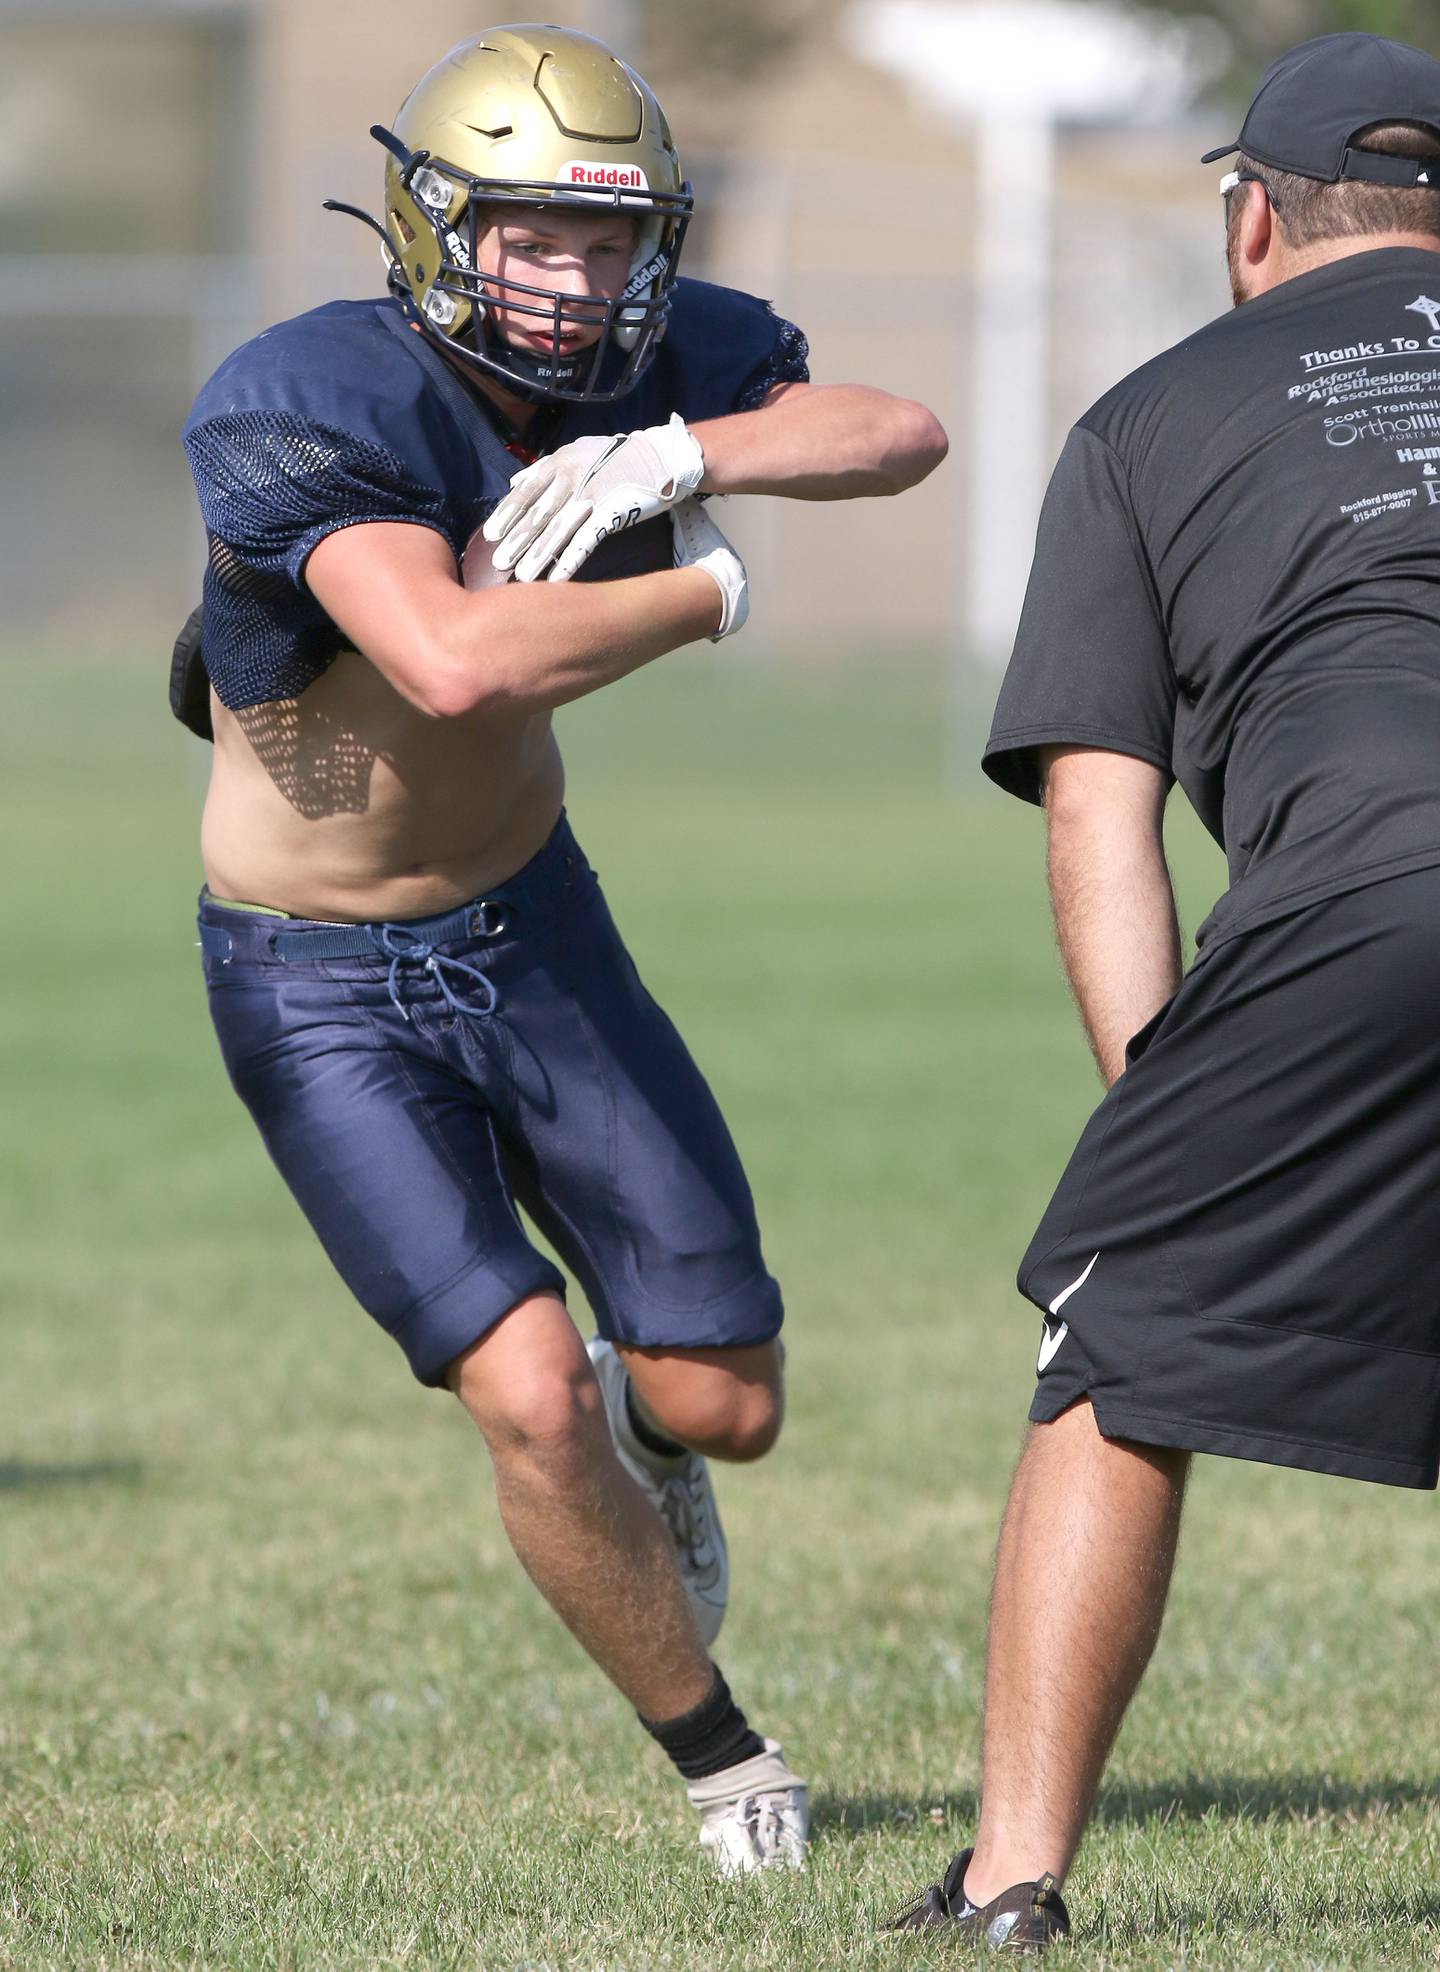 Hiawatha running back Cole Brantley carries the ball during practice Monday, Aug. 16, 2021 at the school in Kirkland.